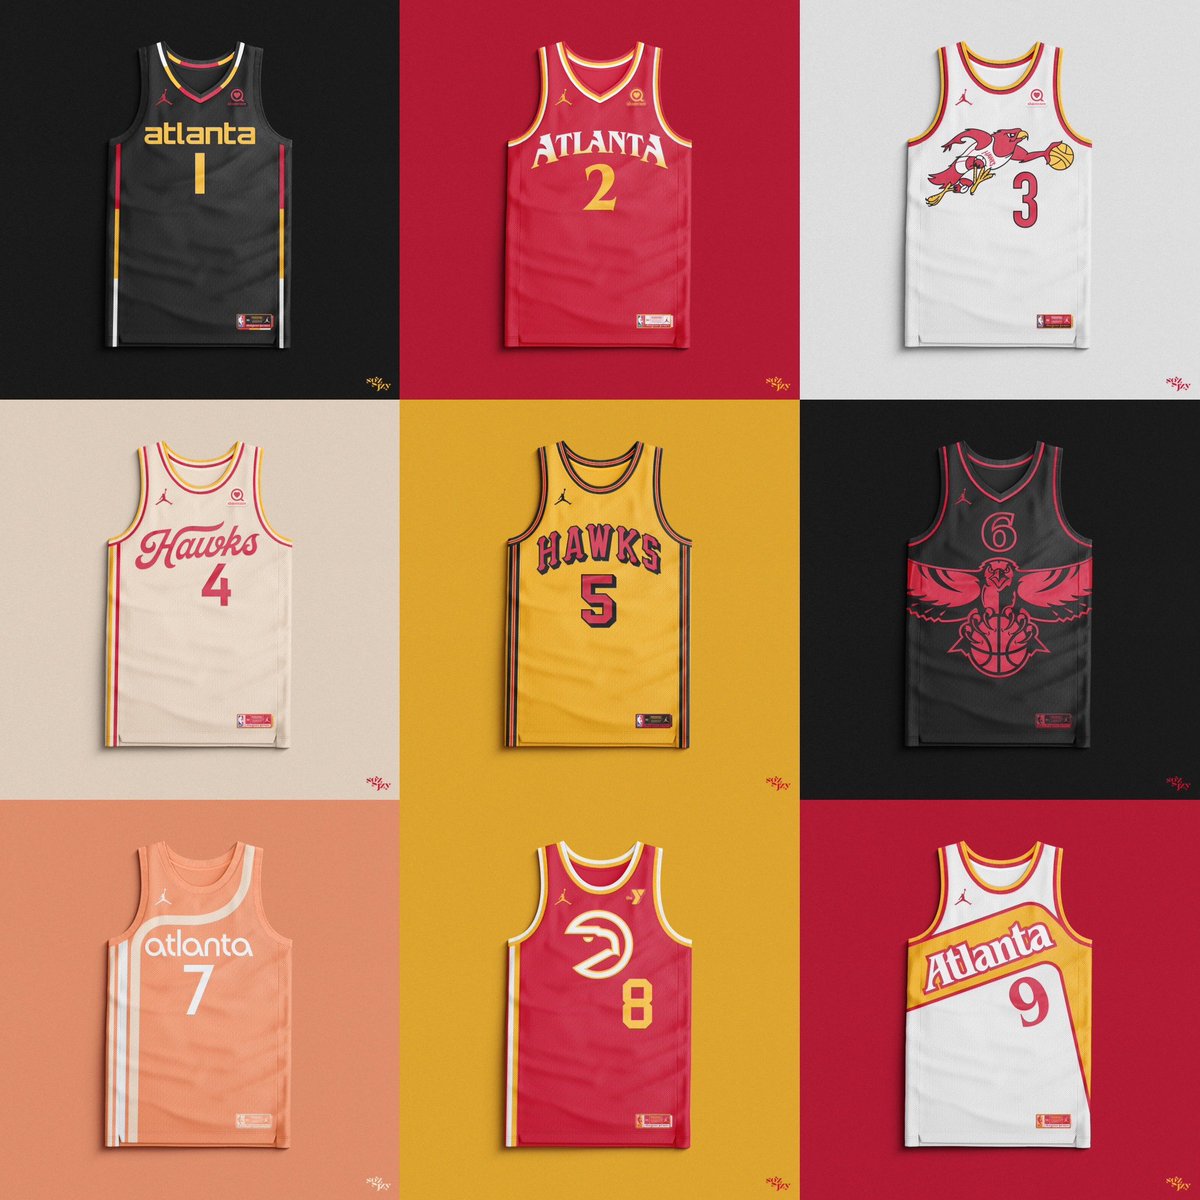 ATL:

Here’s my project from the 2023-24 season where I designed a new Hawks jersey after each win…

Which is your favorite?

#TrueToAtlanta 

1/4 ⬇️